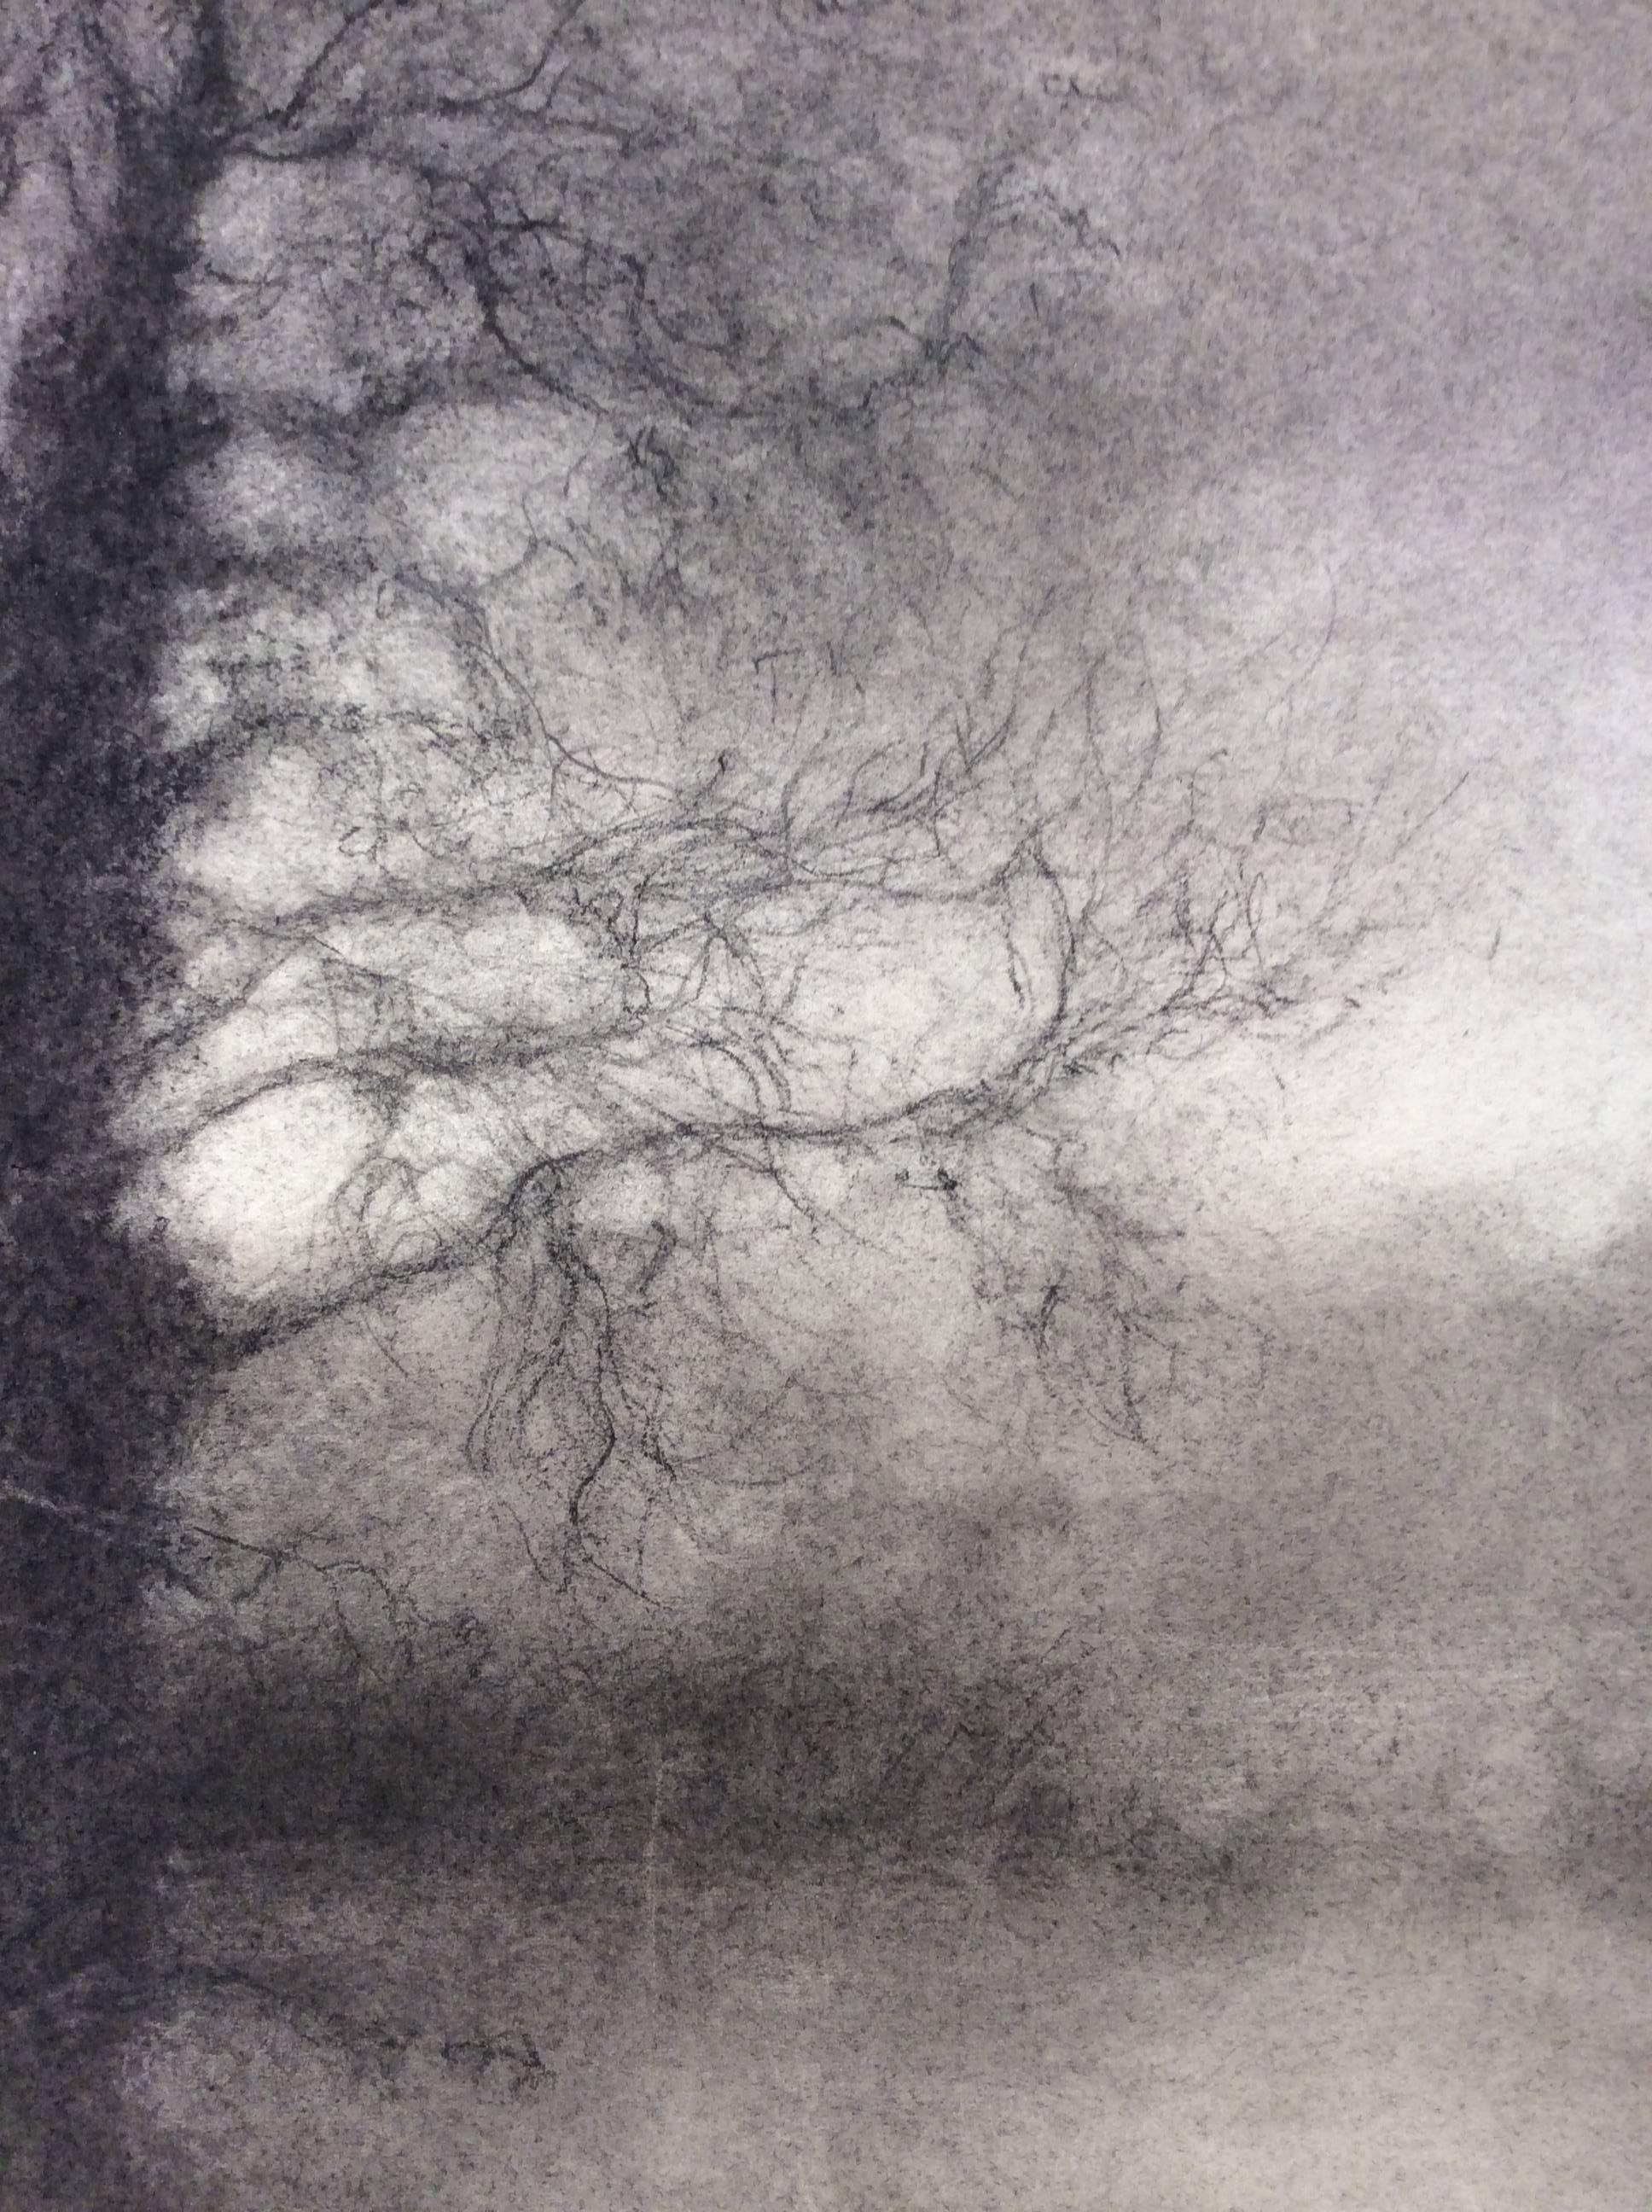 Winter Tree 4 (Black & White Realistic Landscape Charcoal Drawing on Paper) - Modern Art by Sue Bryan